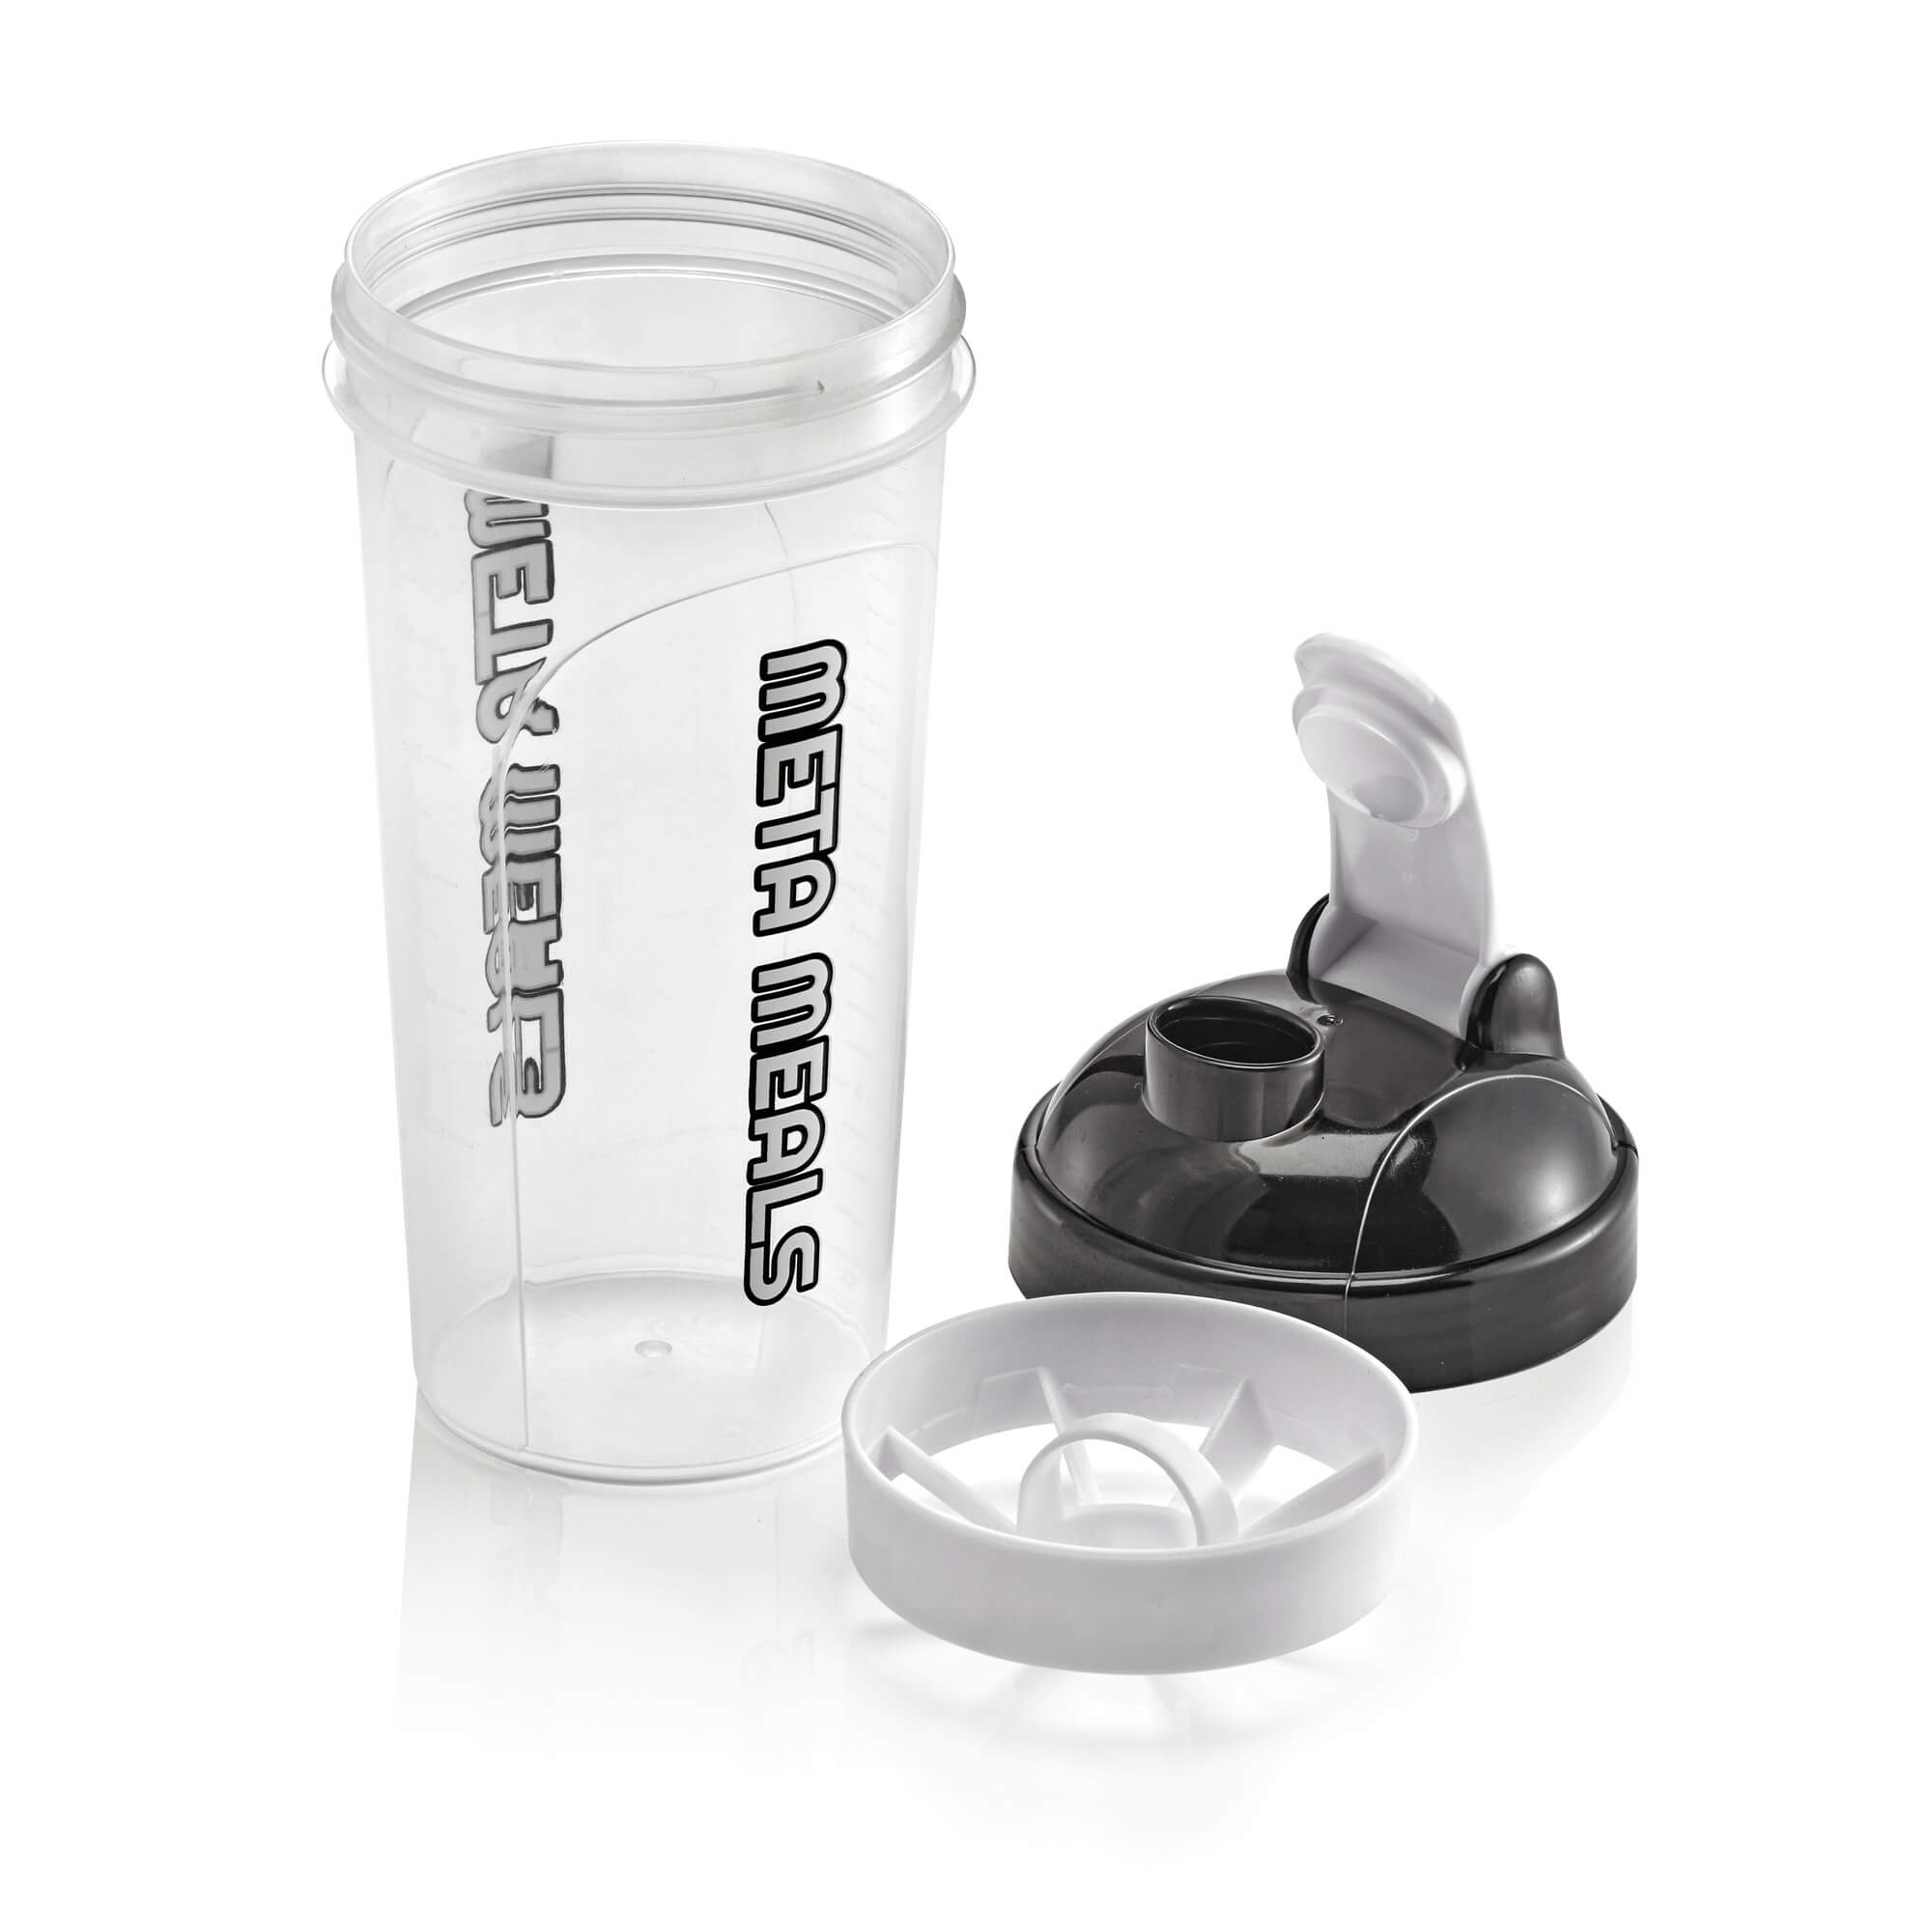 Clear shaker bottle pictured disassembled with strainer and lid